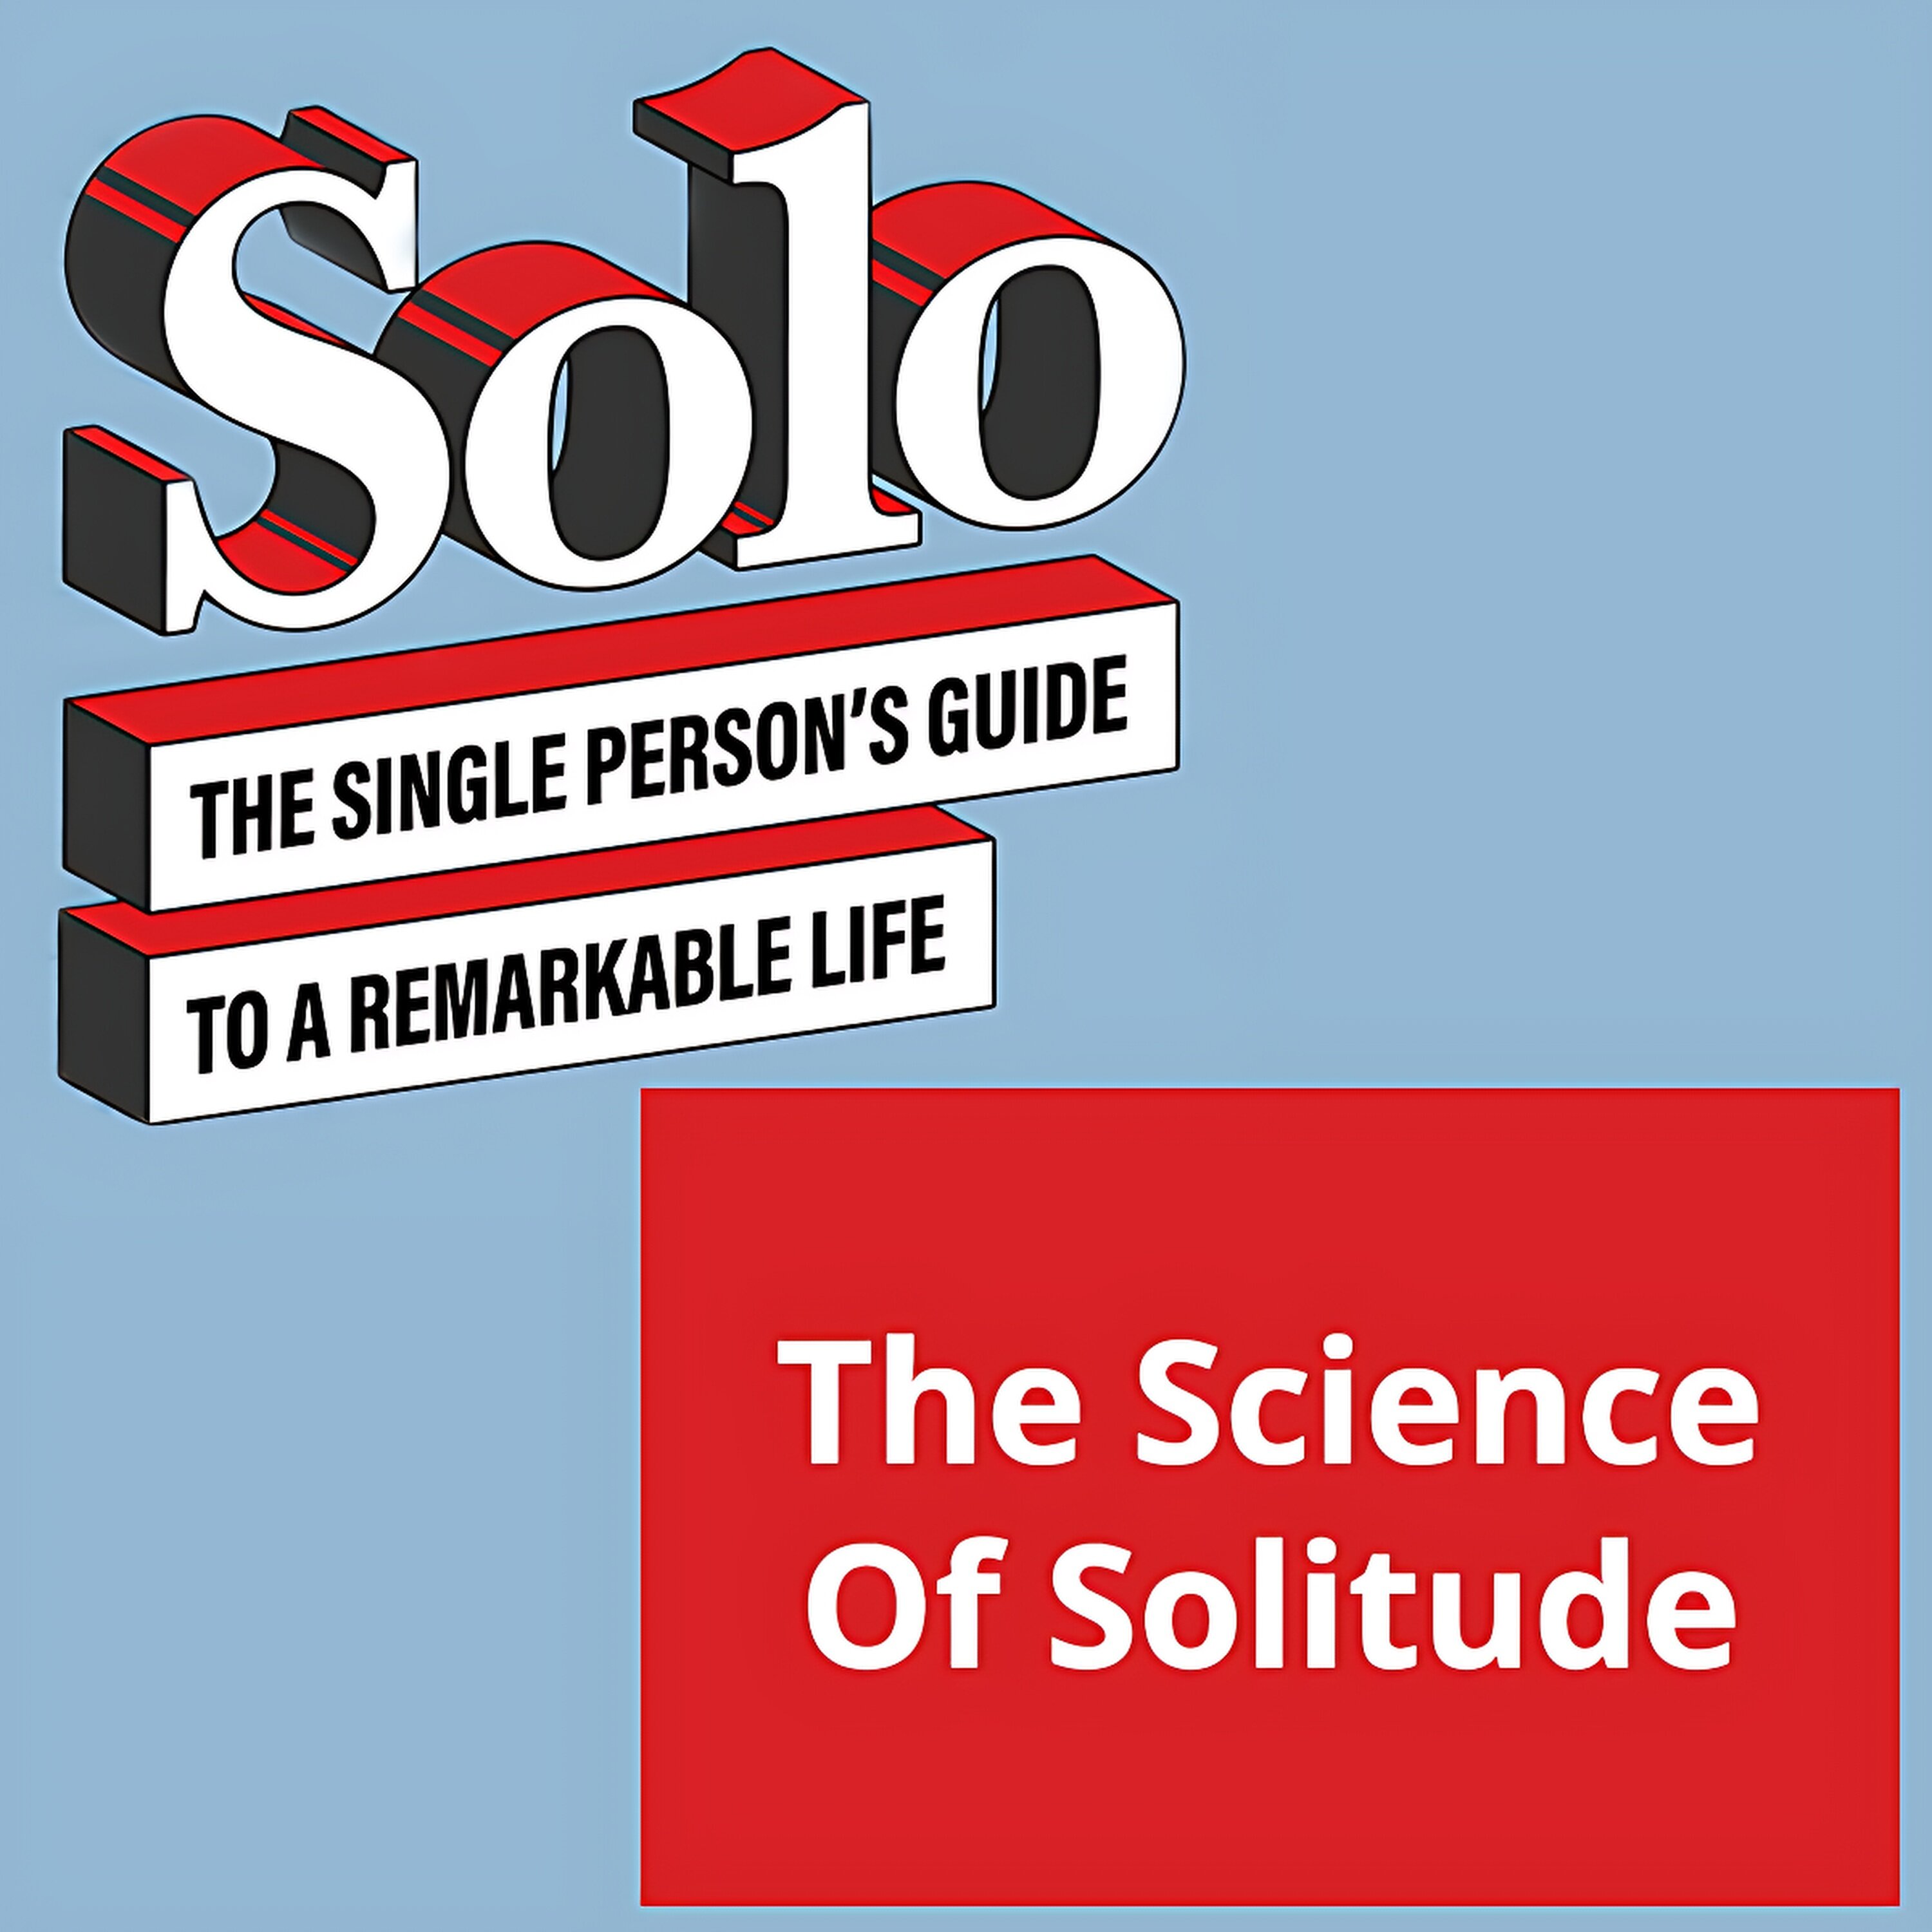 The Science Of Solitude